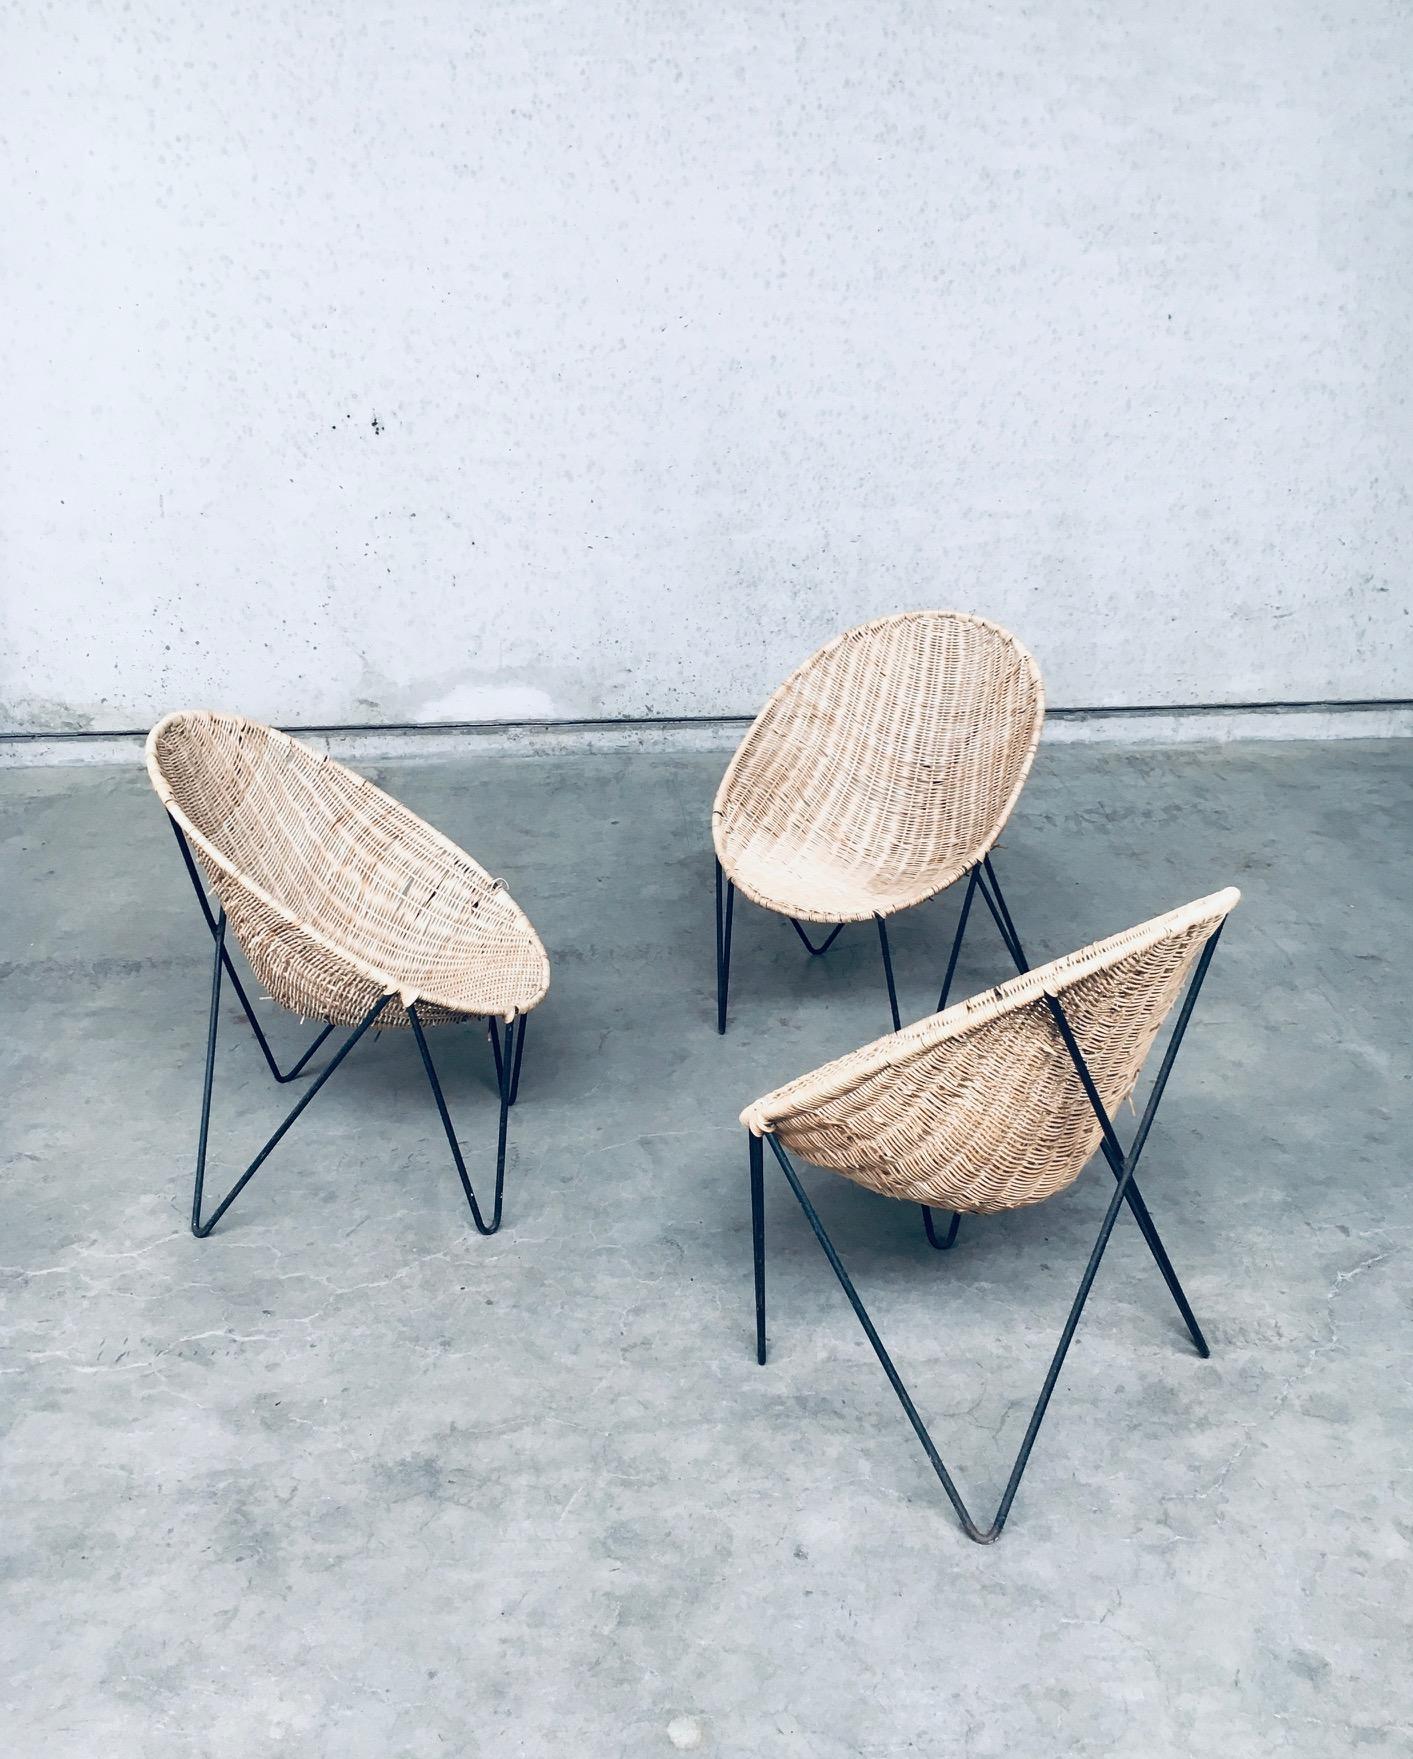 Mid-20th Century Midcentury Modern Design EGG Basket Wicker Chair set, Italy 1950's For Sale